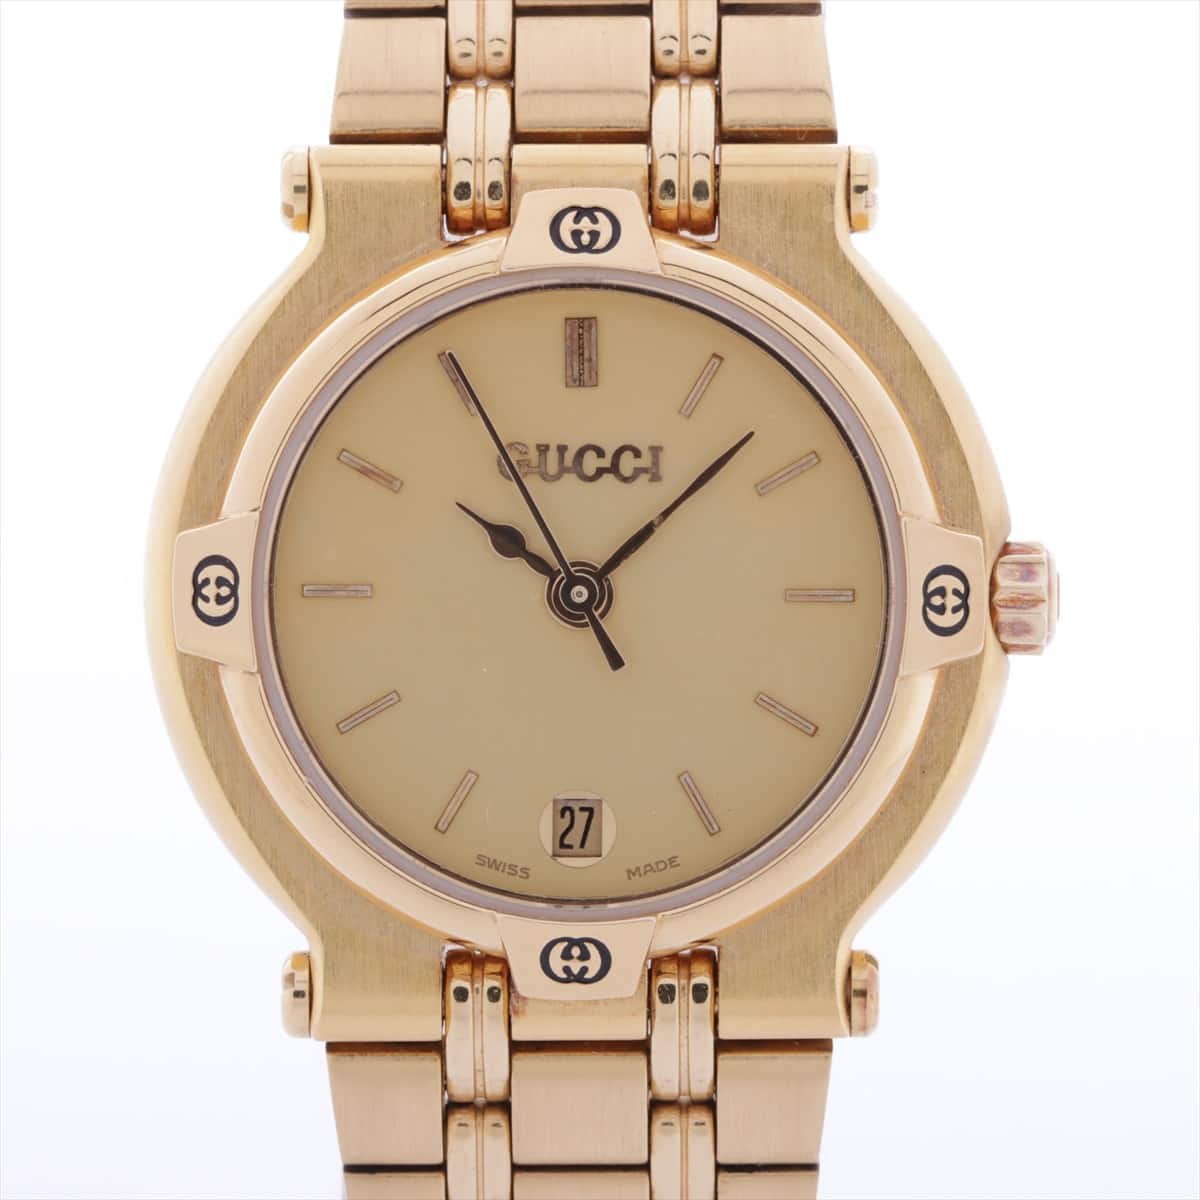 Gucci 9200L GP QZ Champagne-Face Inner box only